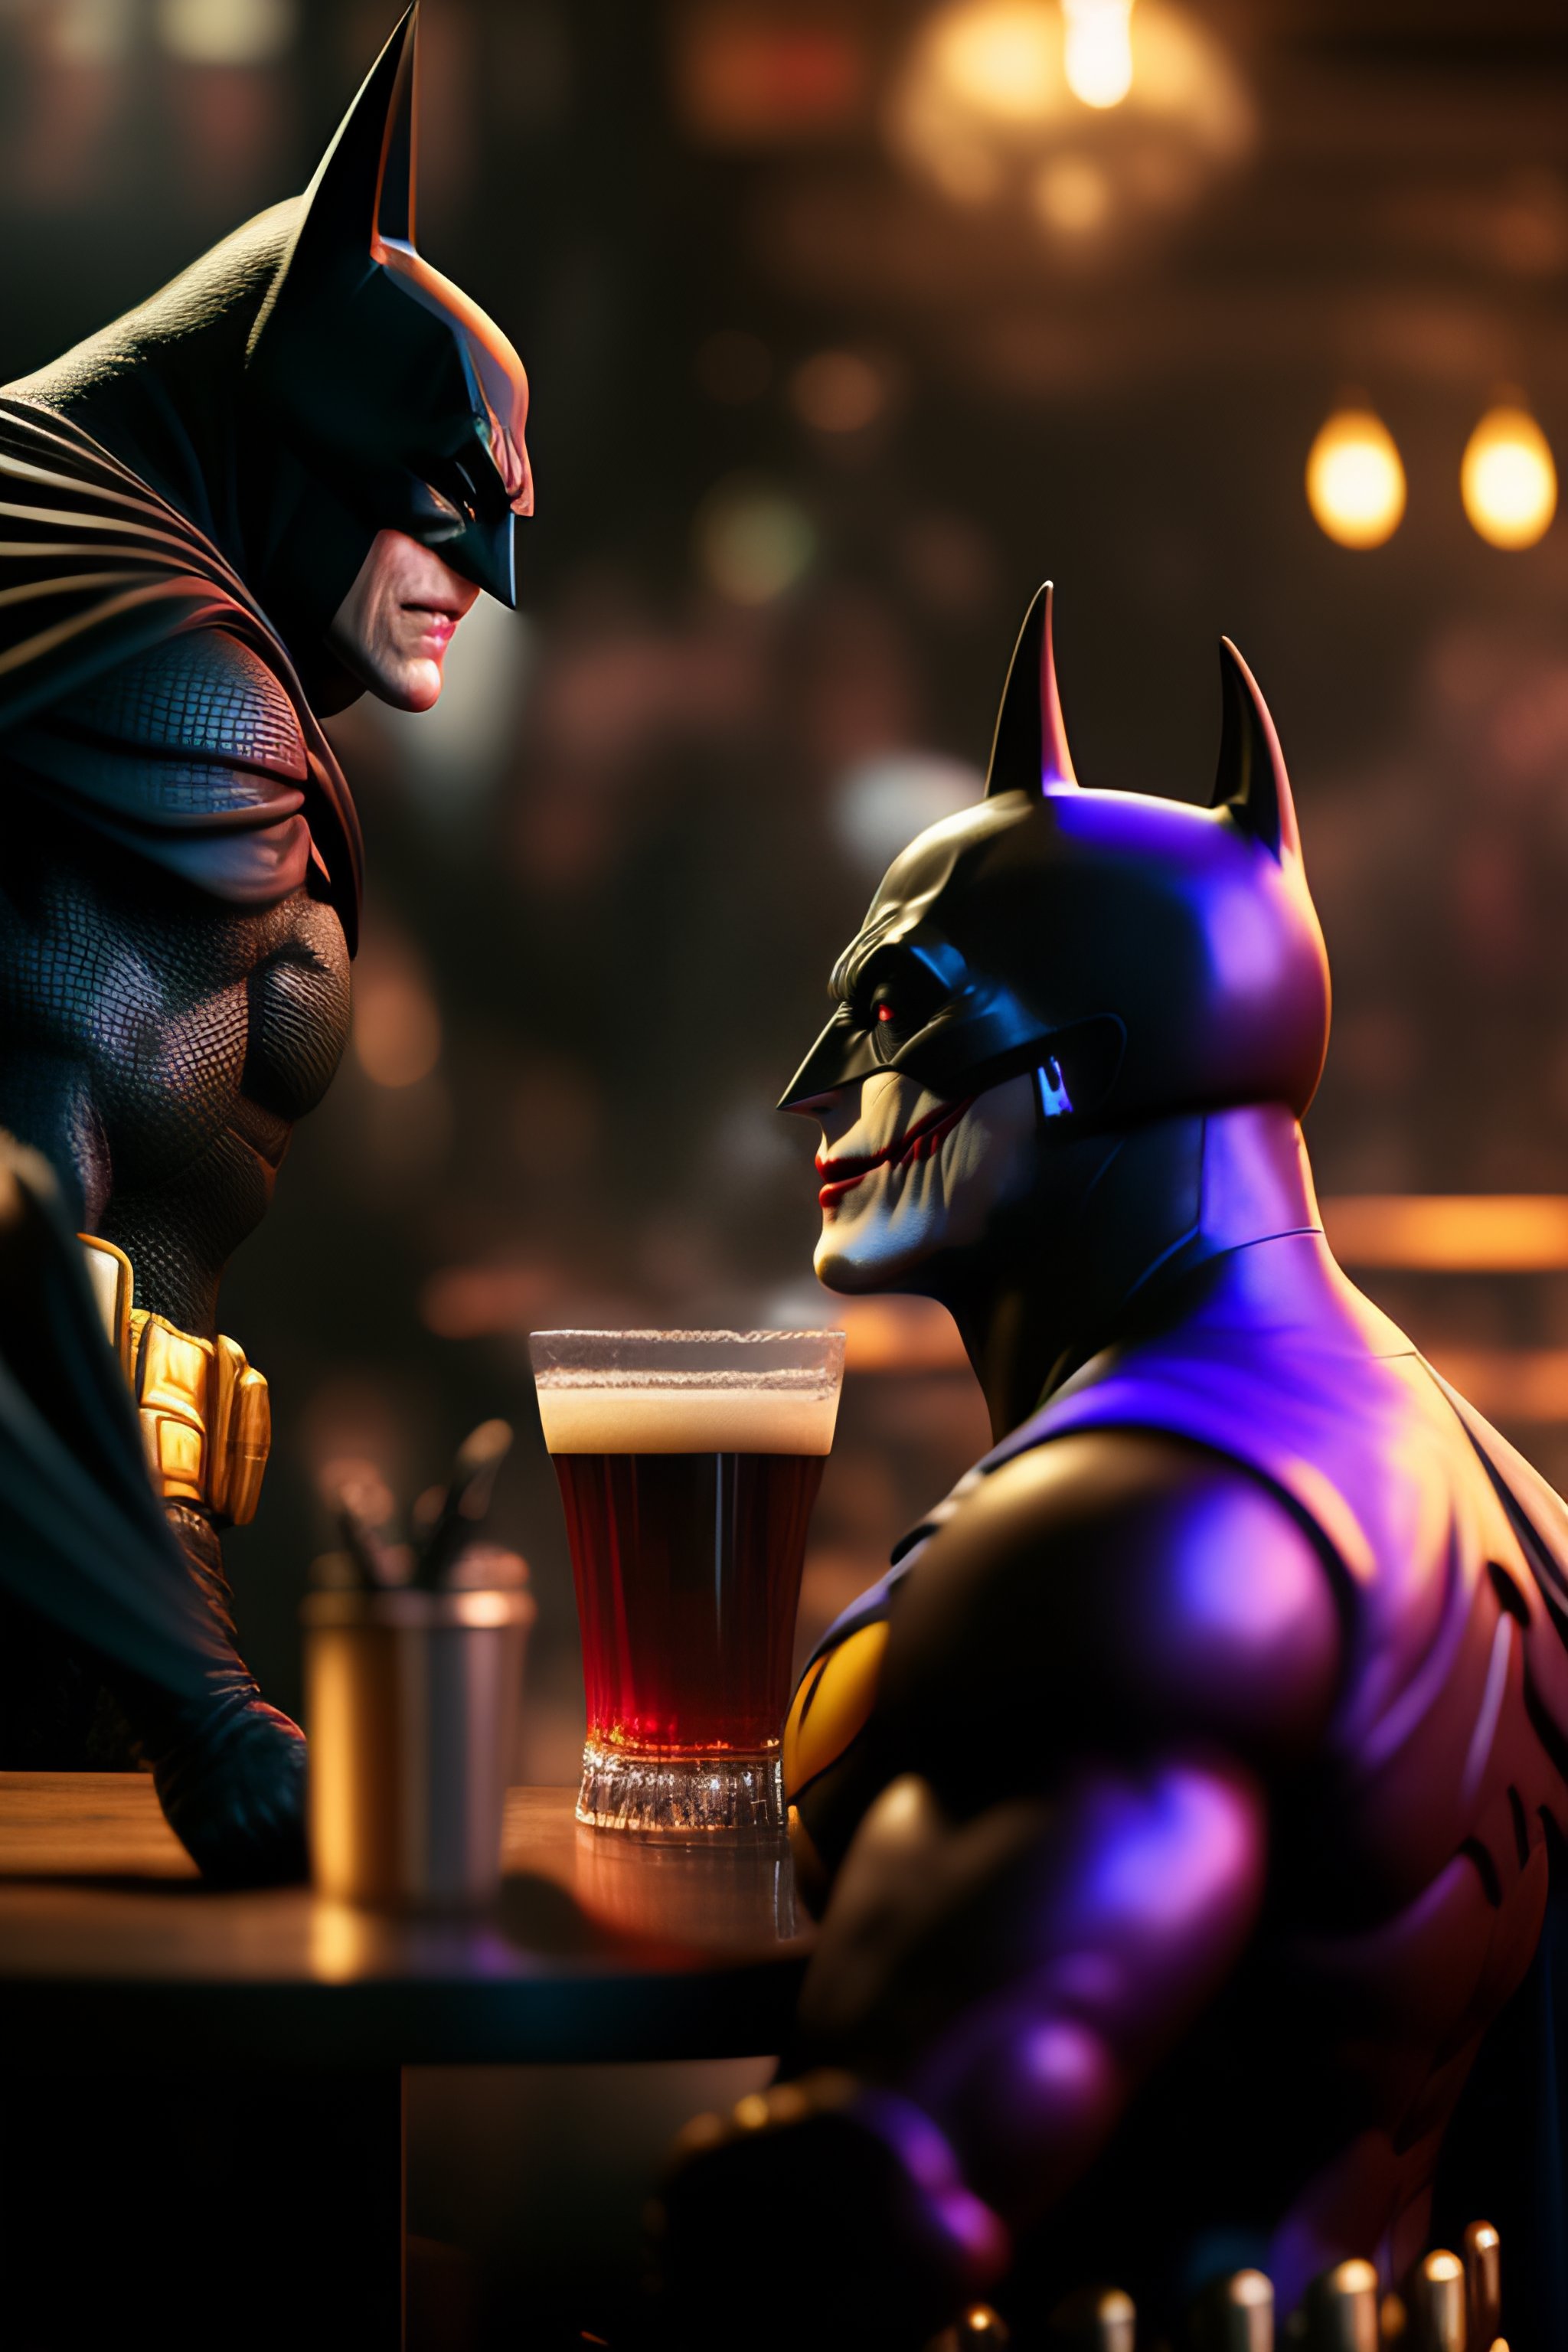 Lexica - Batman getting a drink with The Joker at a neighborhood bar one  day after work. They both seem happy